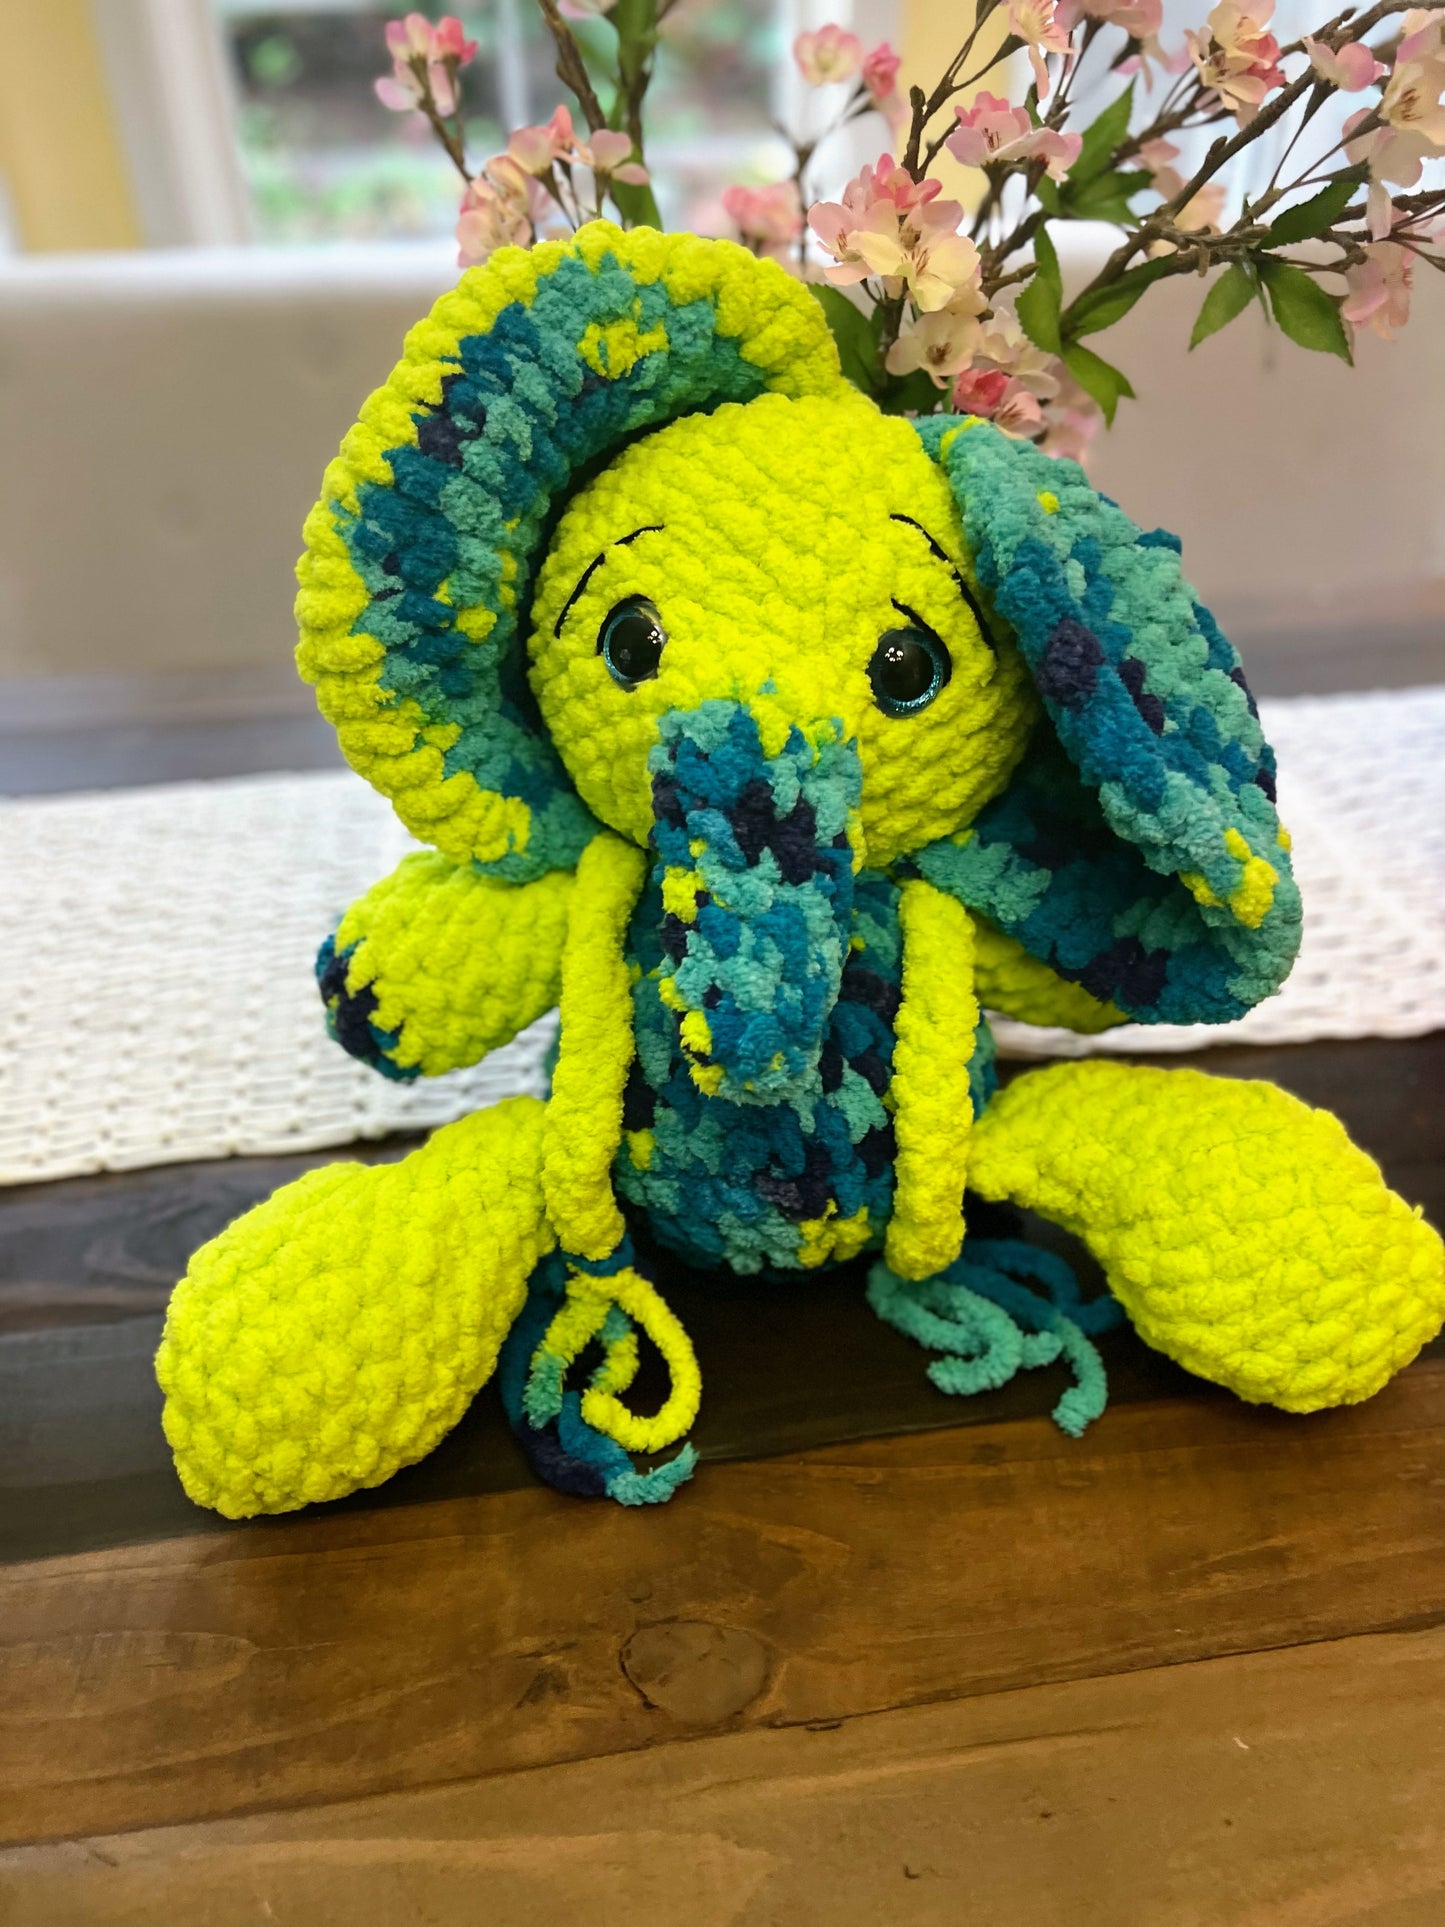 Stuffed Jumbo Elephant- Crochet Knitted Amigurumi Toy (Different colors available)